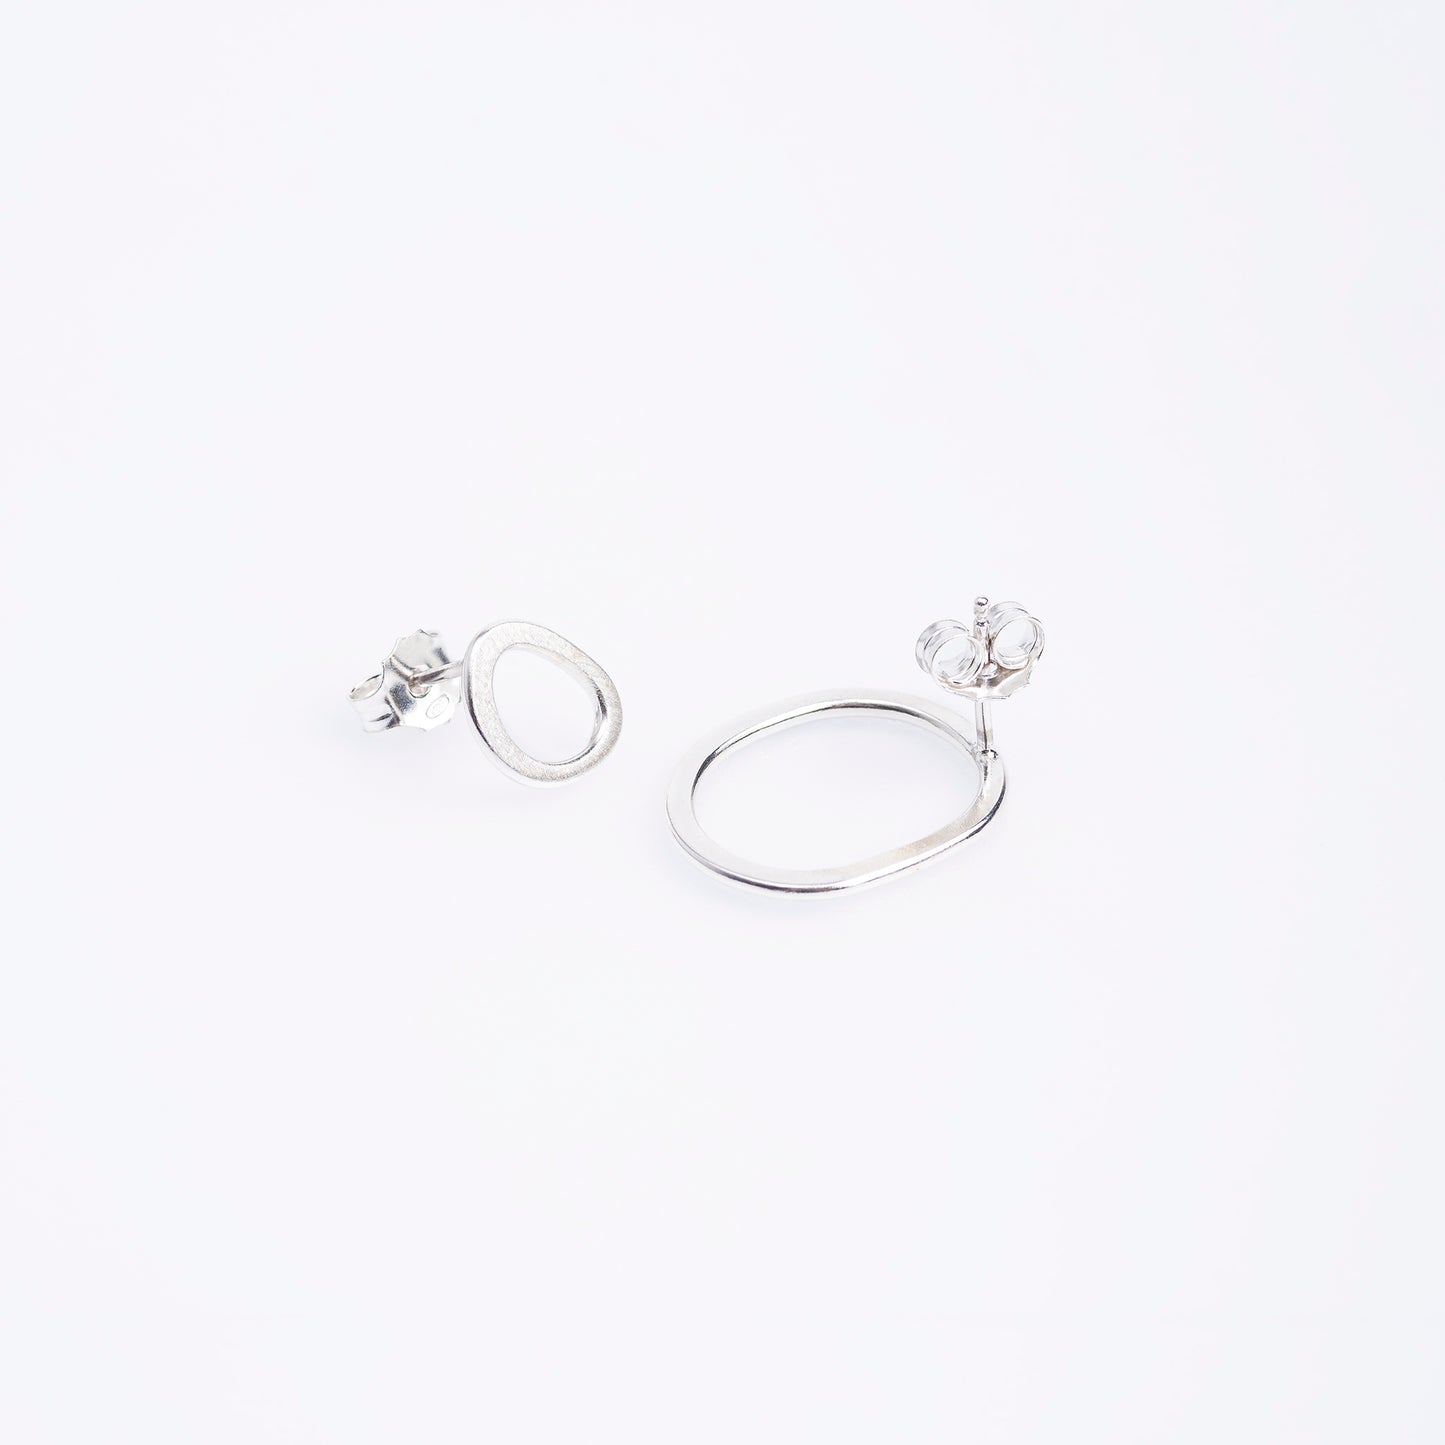 The Perfect Circle Earrings No. 3